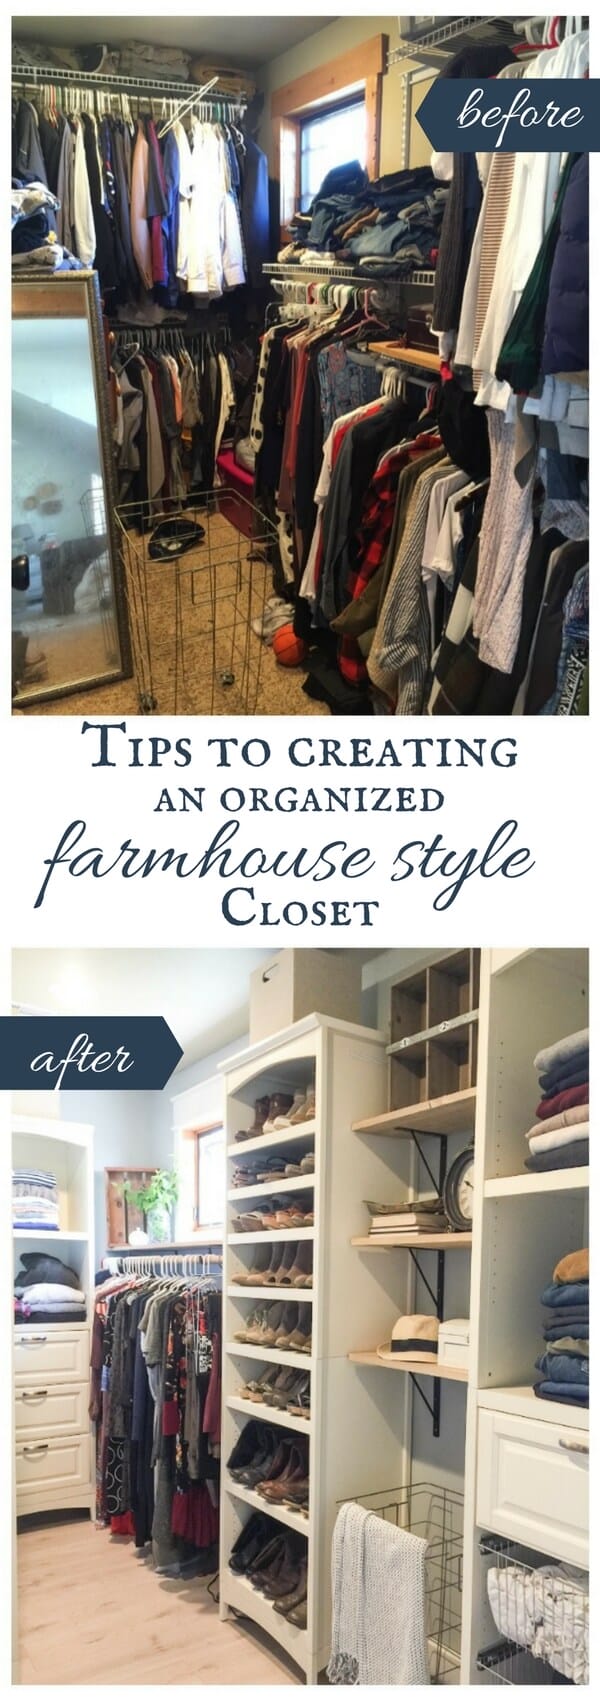 Tips to creating a closet design that is organized as well as stylish